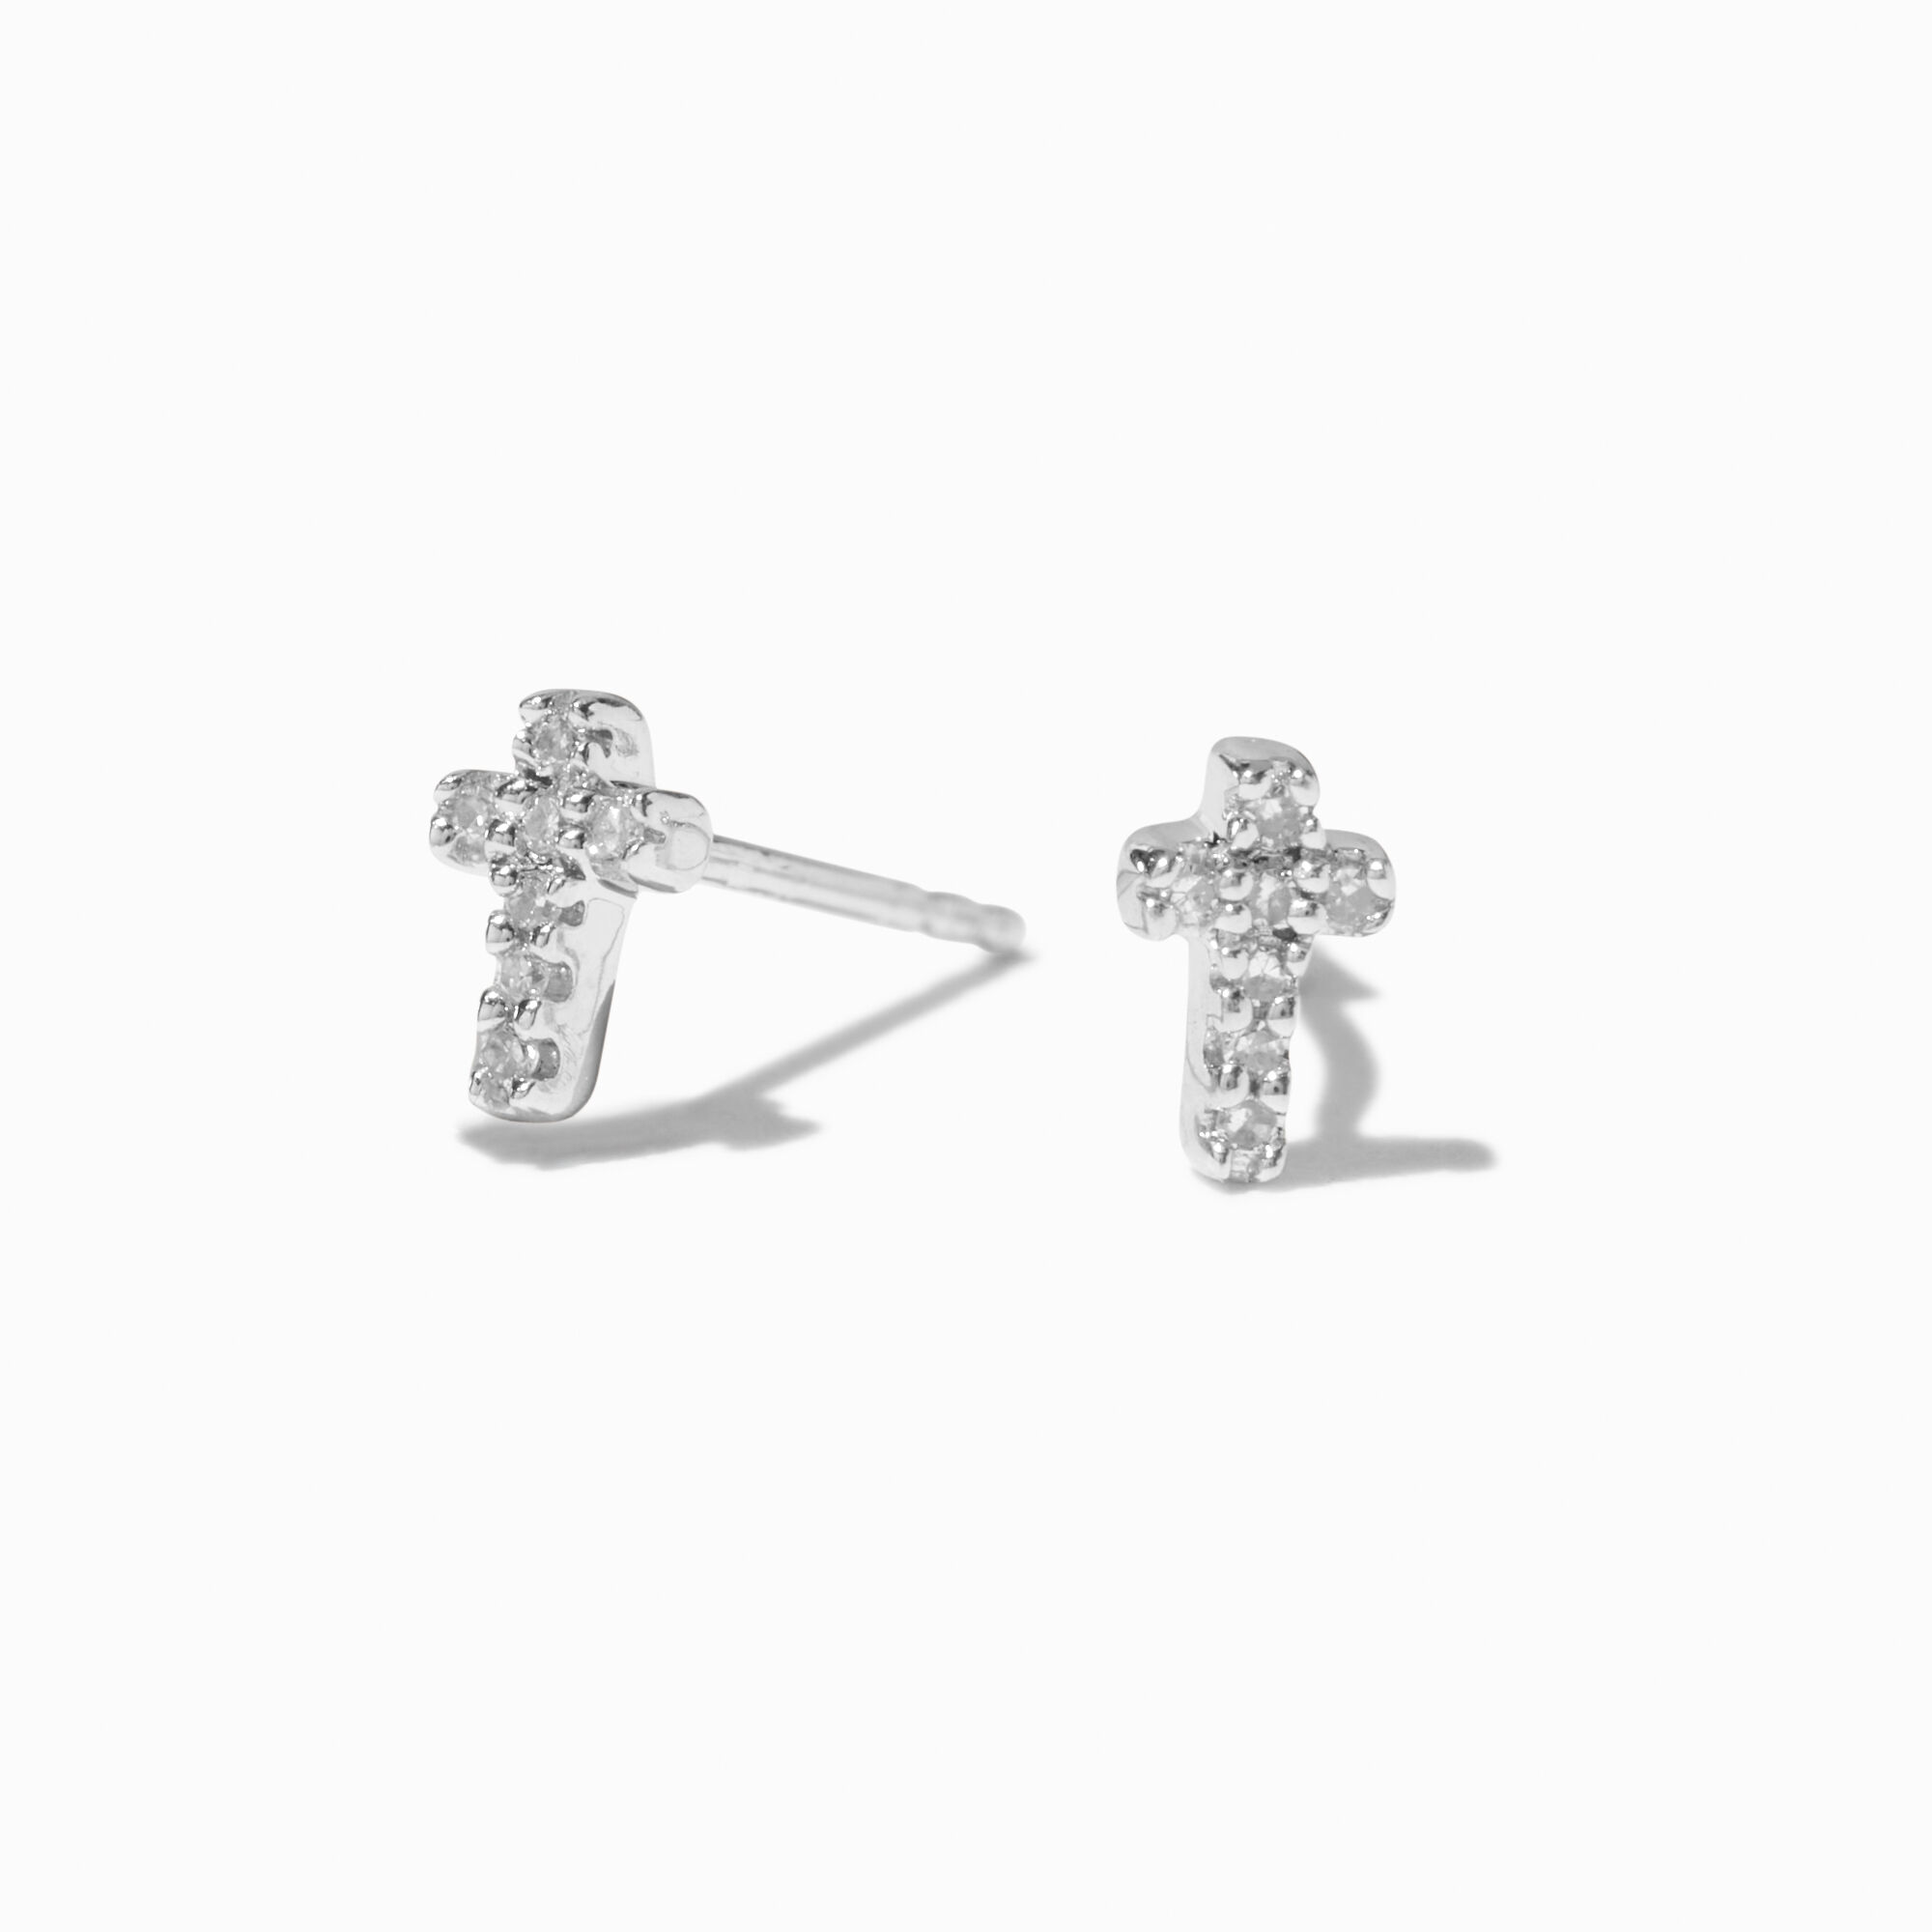 View C Luxe By Claires 120 Ct Tw Laboratory Grown Diamond Cross Stud Earrings Silver information